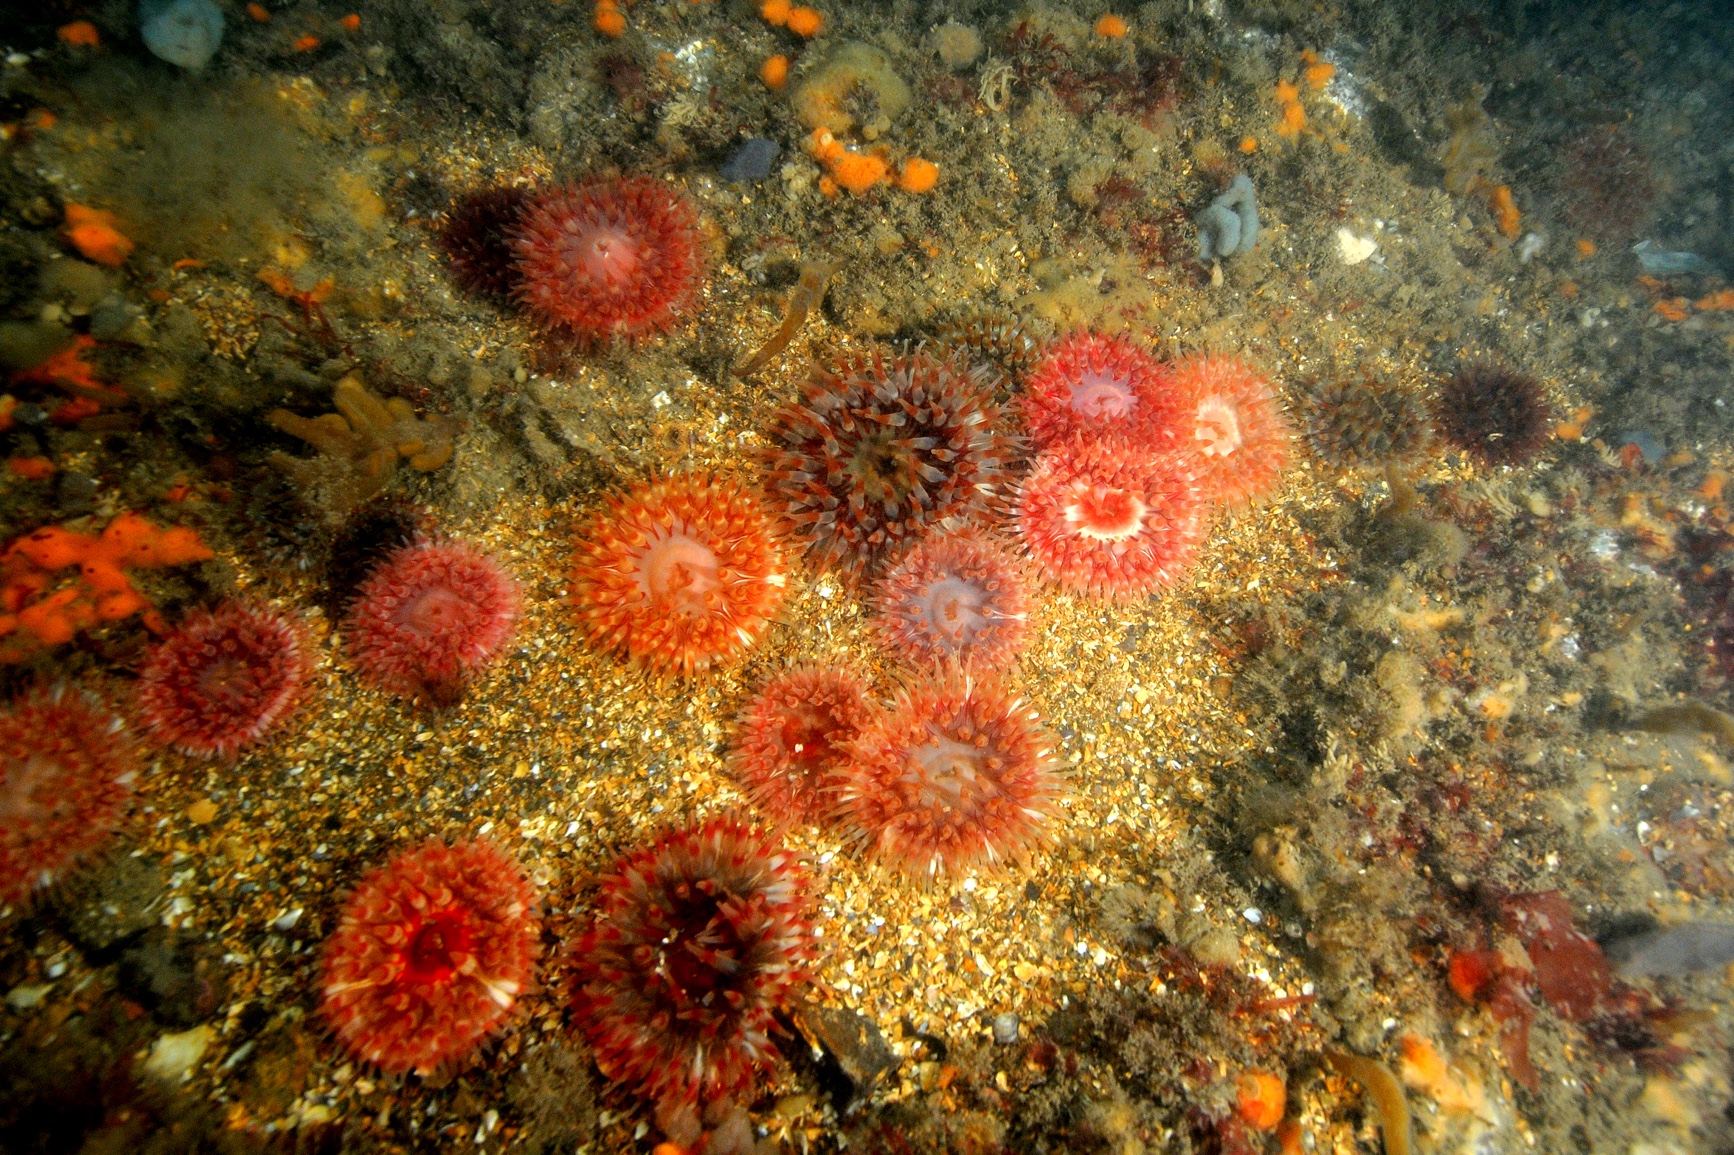 2004, RPS Hydrosearch, Thames Array Analysis of Seabed Videos - For Presence of the Reef-Building Ross Worm, Sabellaria spinulosa